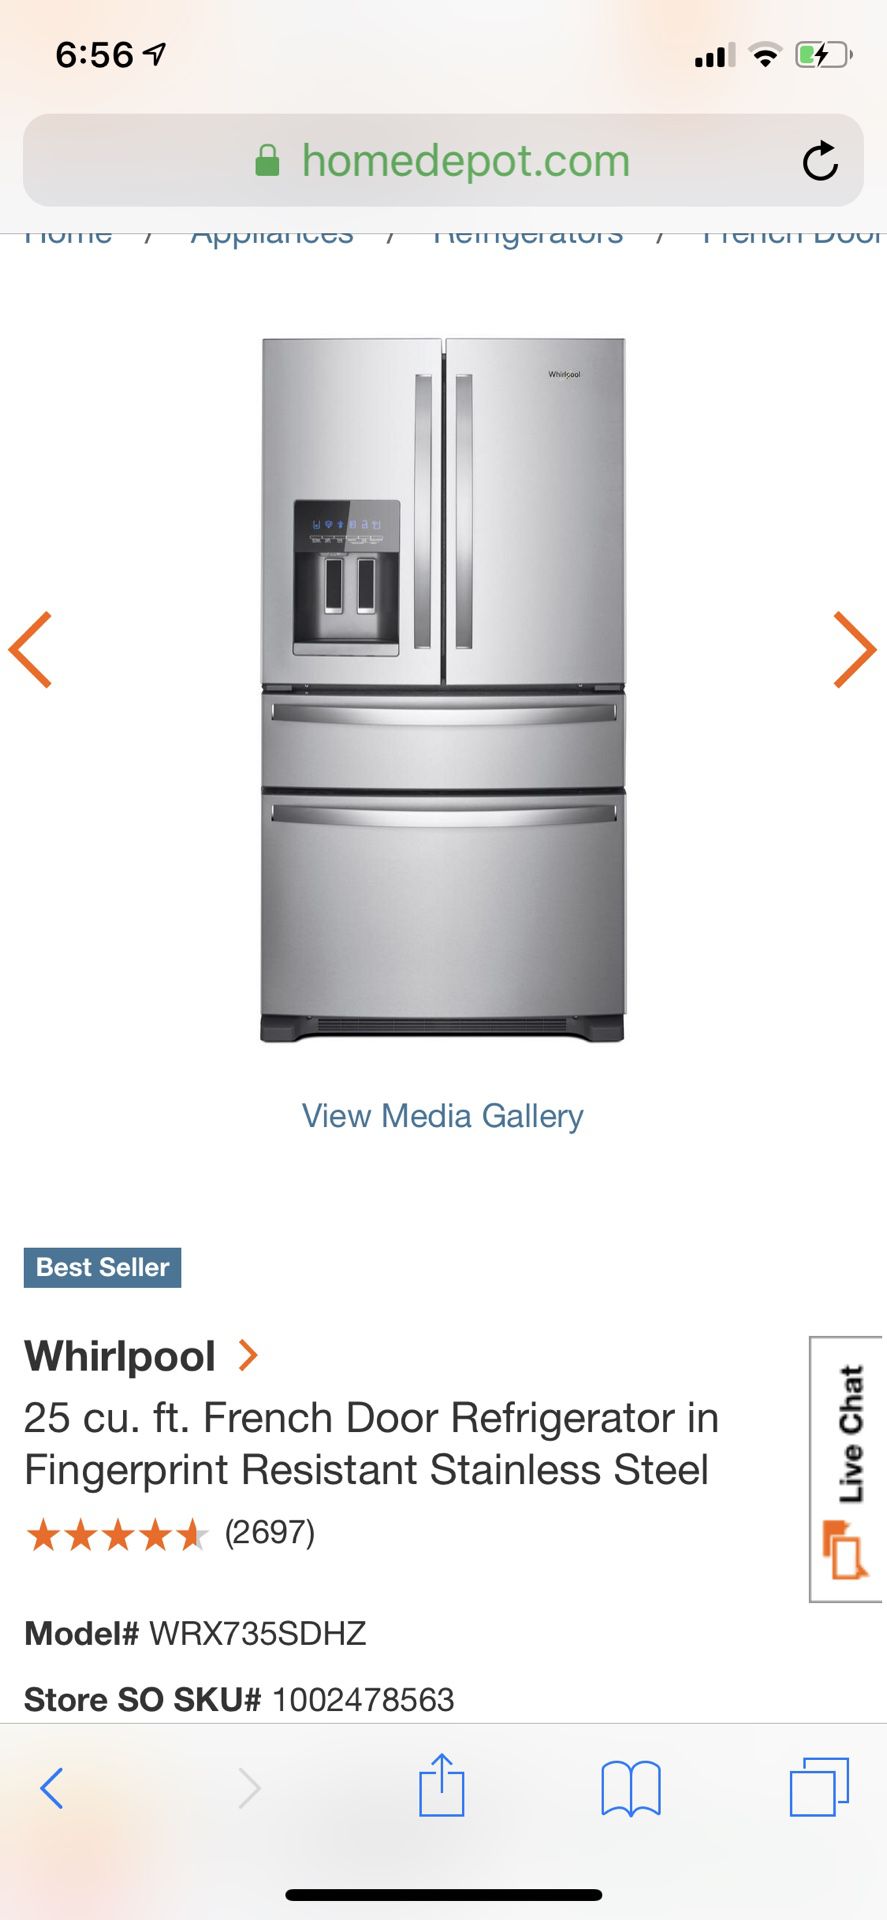 Whirlpool fridge we upgraded and selling this one great condition 700 OBO